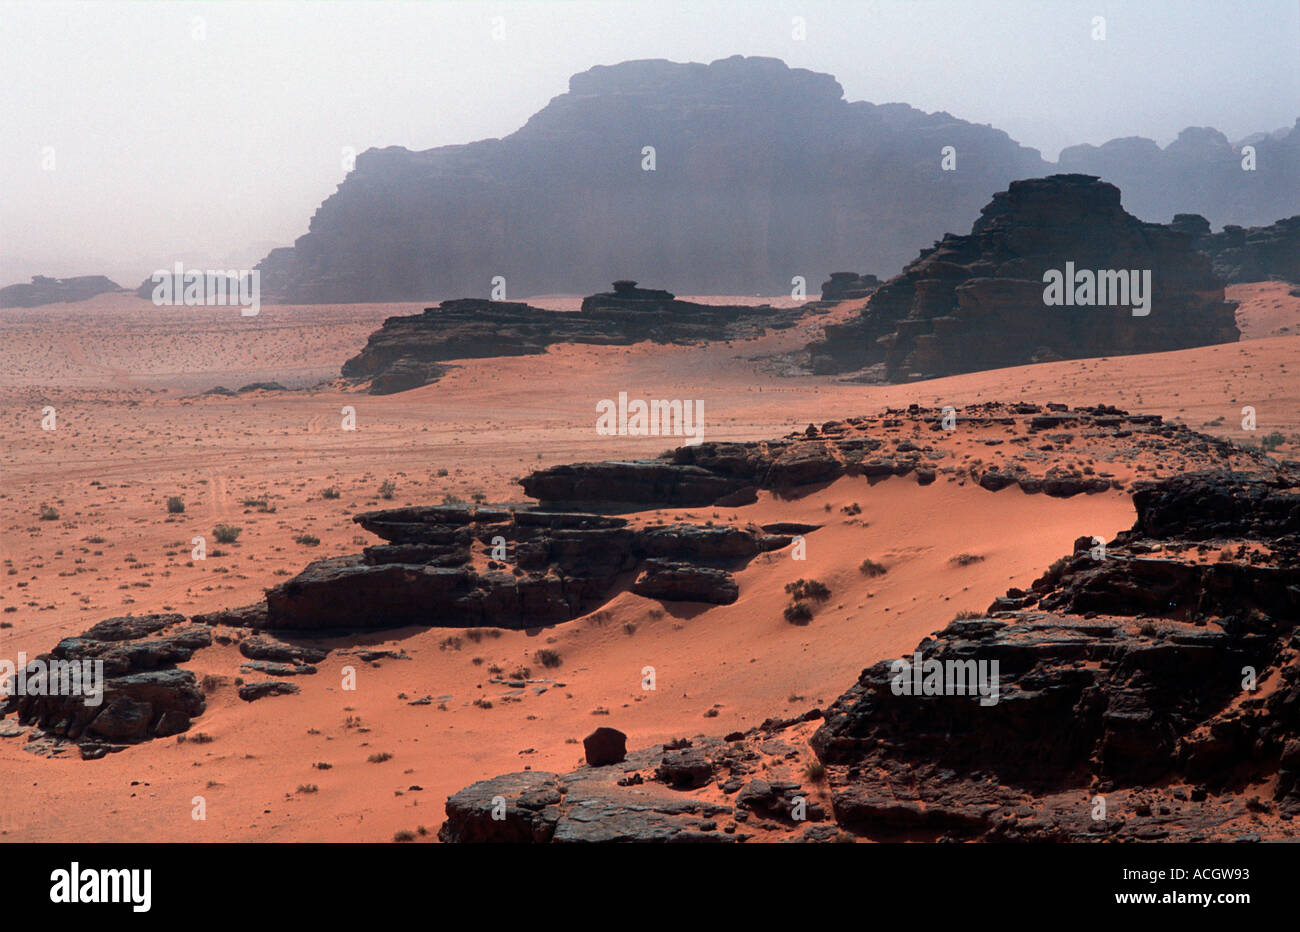 Red sand floor of the desert with rocky outcrops called Jebels in the distance Wadi Rum Jordan Stock Photo